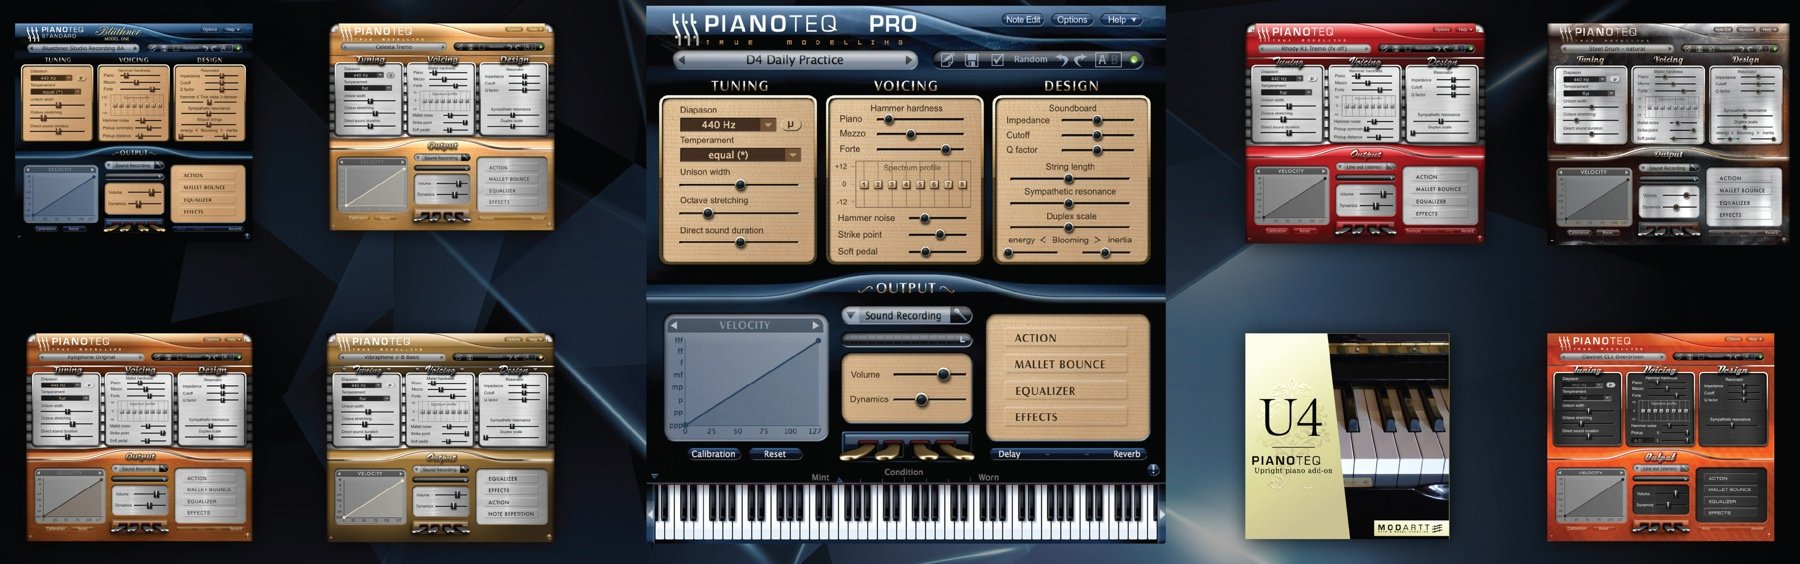 pianoteq 5 light touch